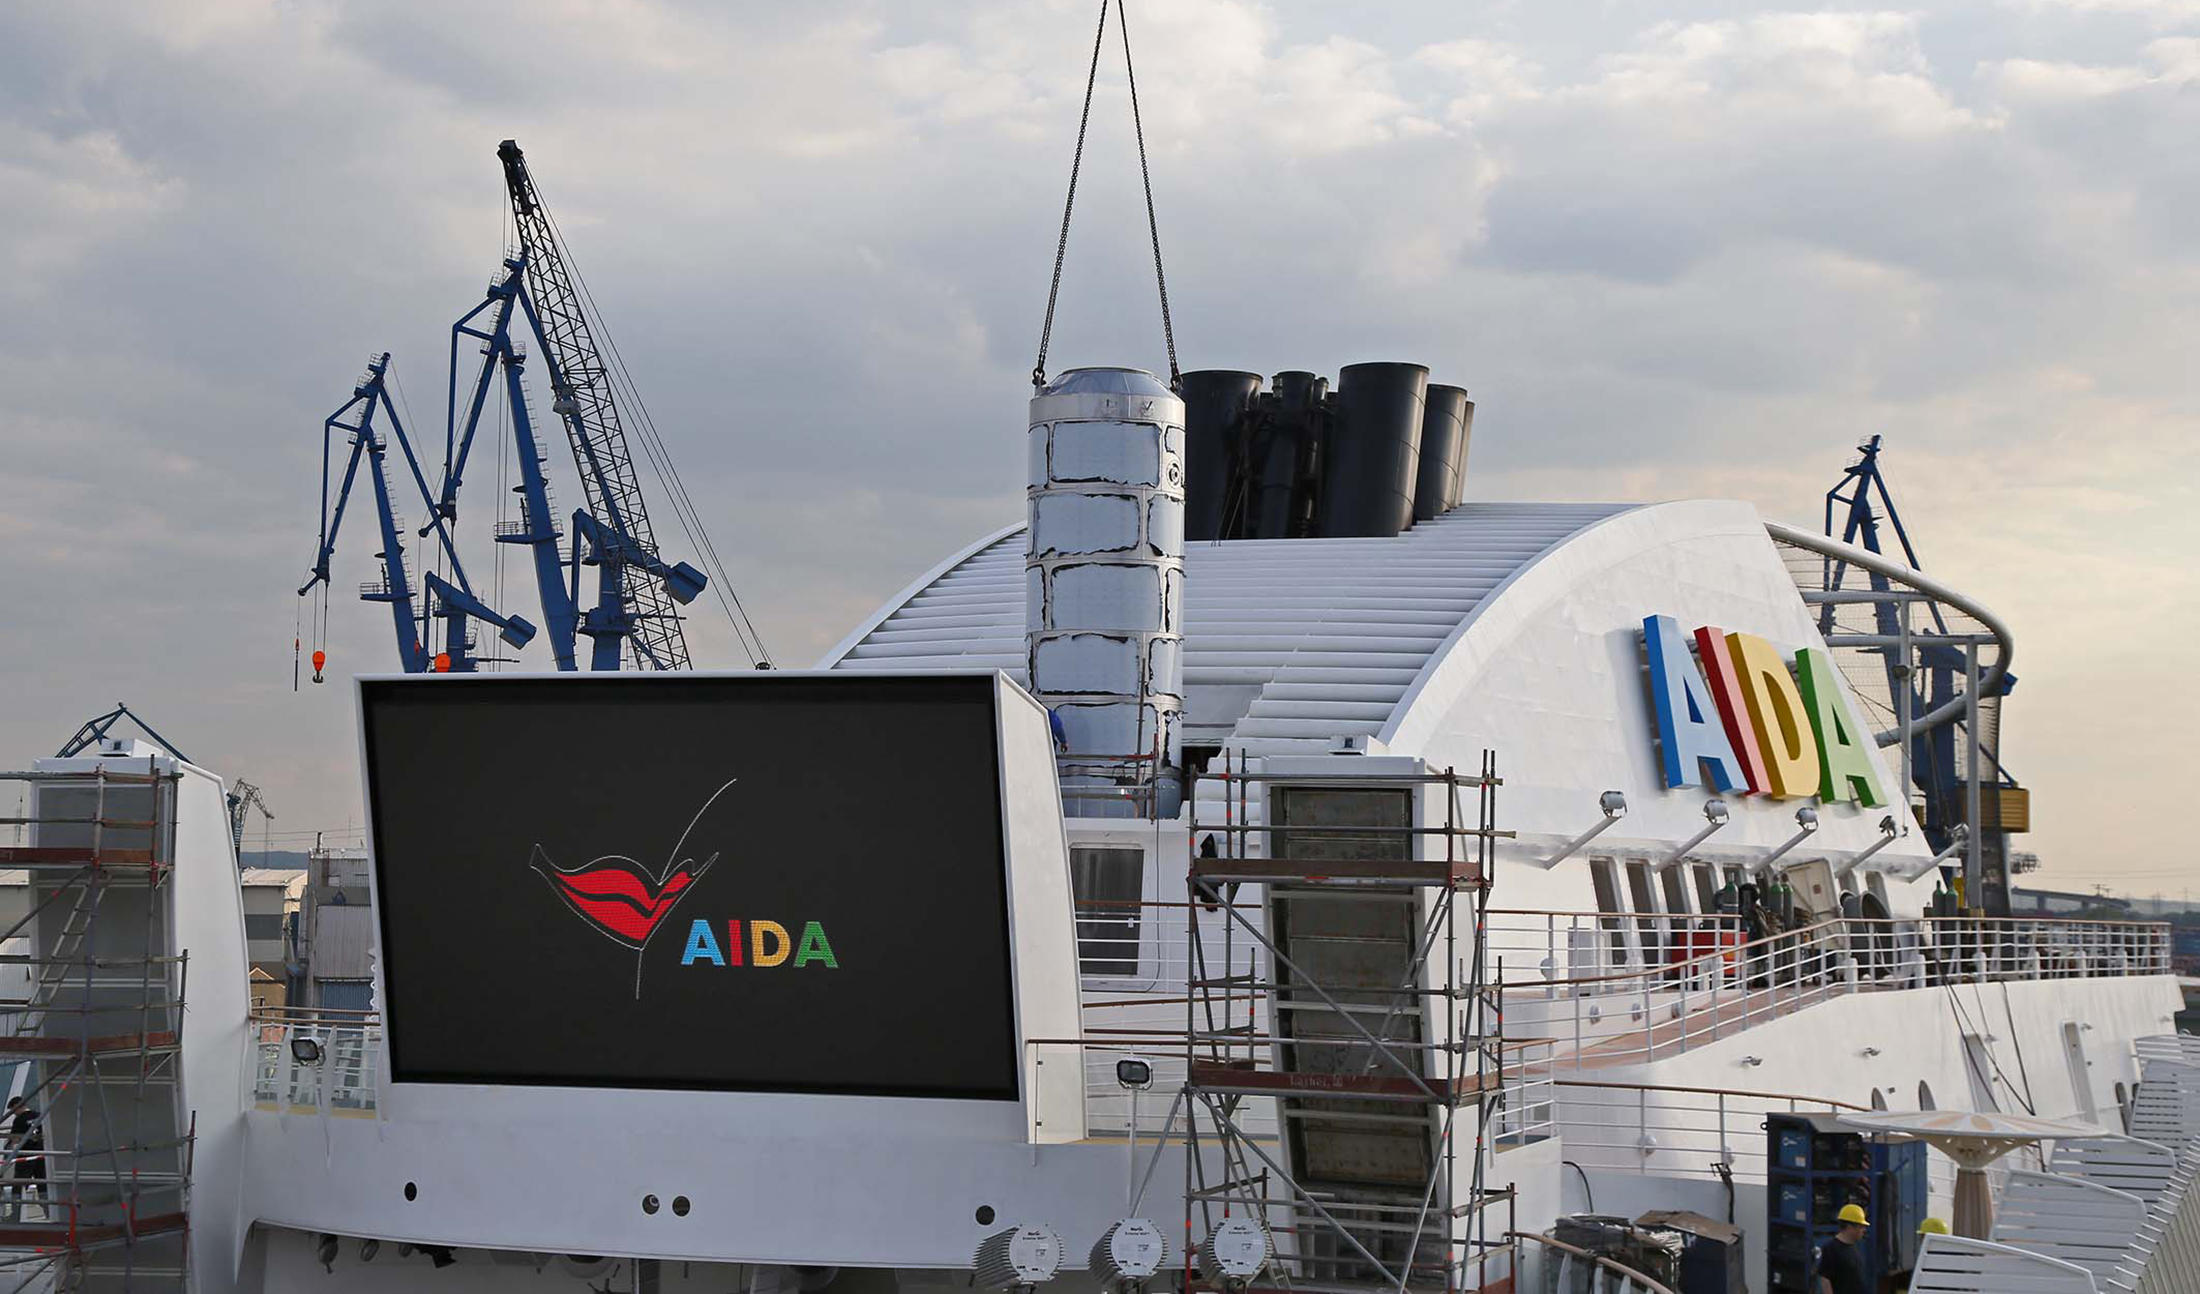 ECO-EGC technology being installed on an AIDA cruise ship